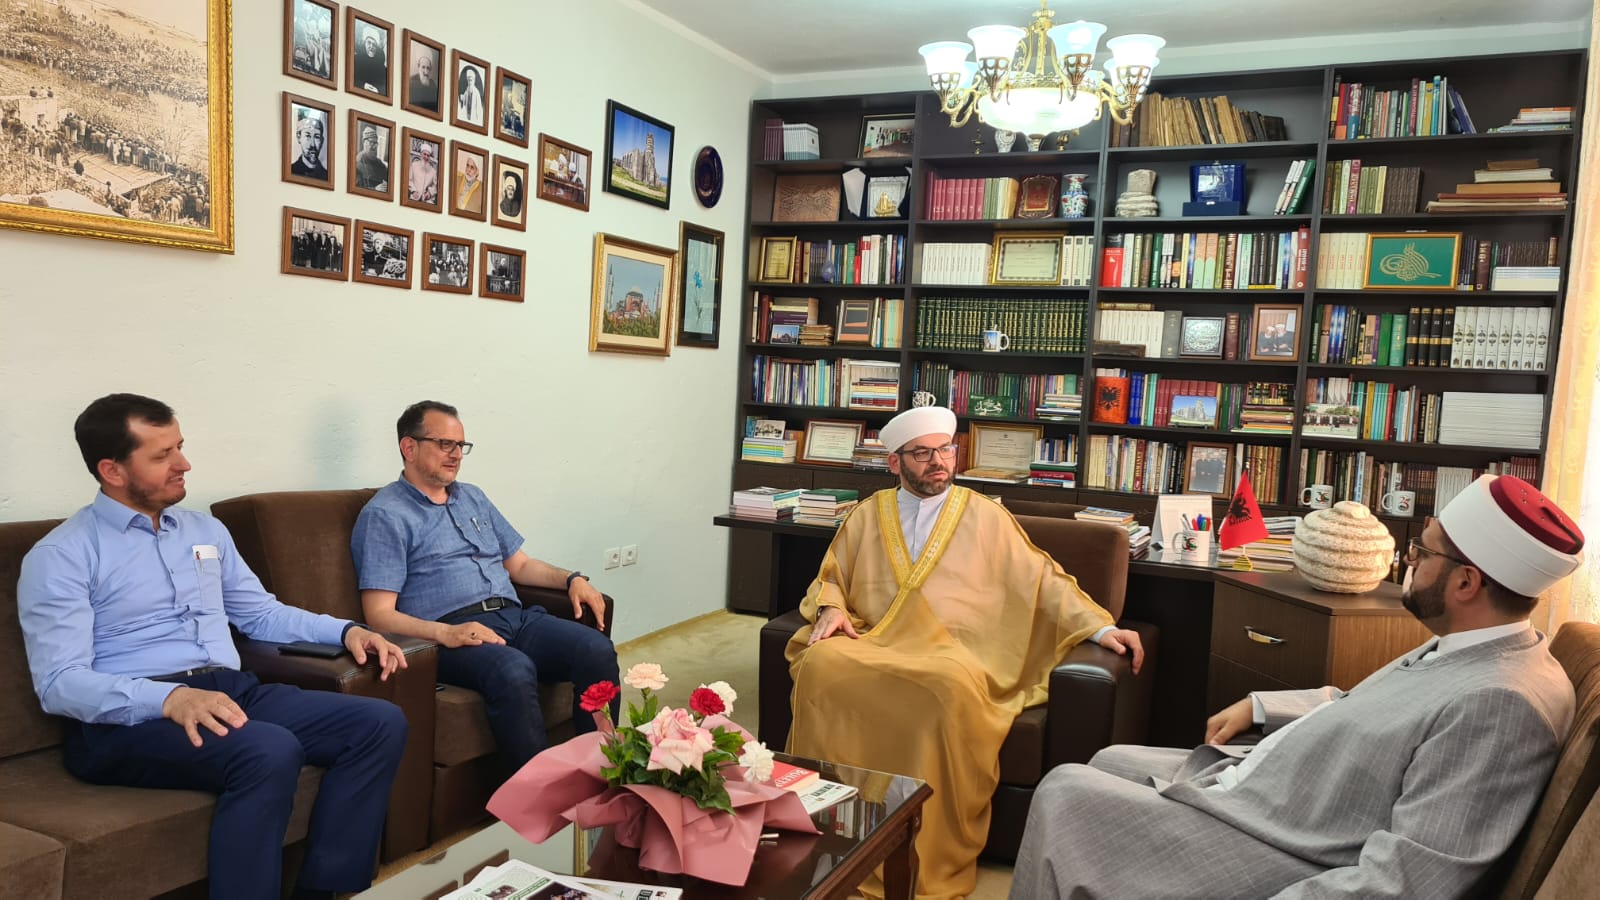 Mufti Didmar Faja visits the office of the Religious Affairs of Shkoder, Albania